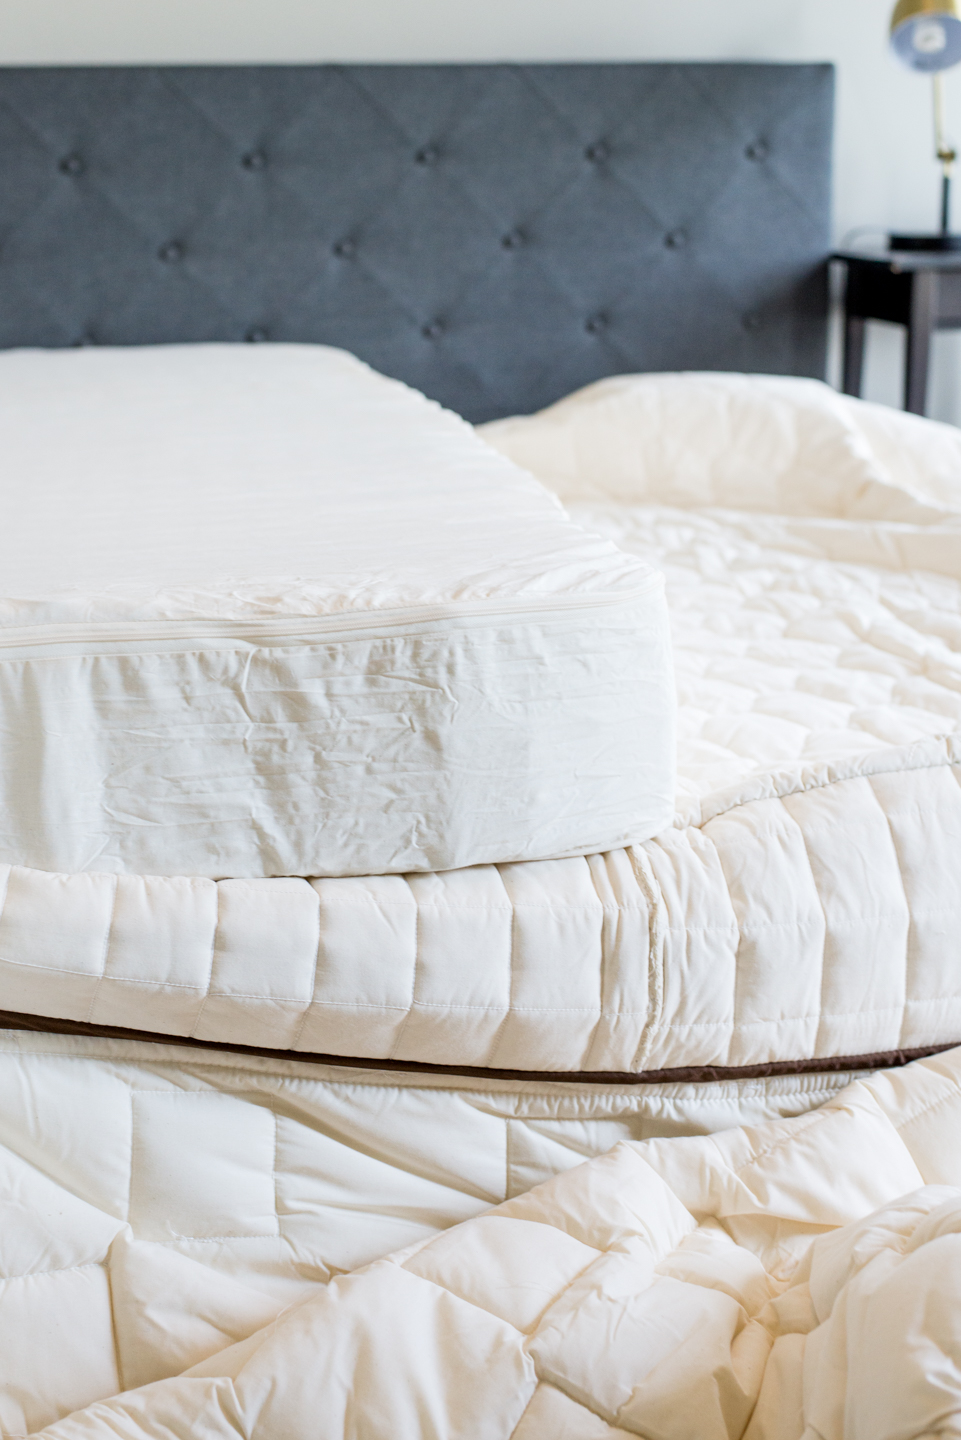 Is your mattress slowly killing you? There is a lot of research coming out about the safety and health implications of a mattress, the thing you spend 1/3 of your life on. Here's what you need to know. 